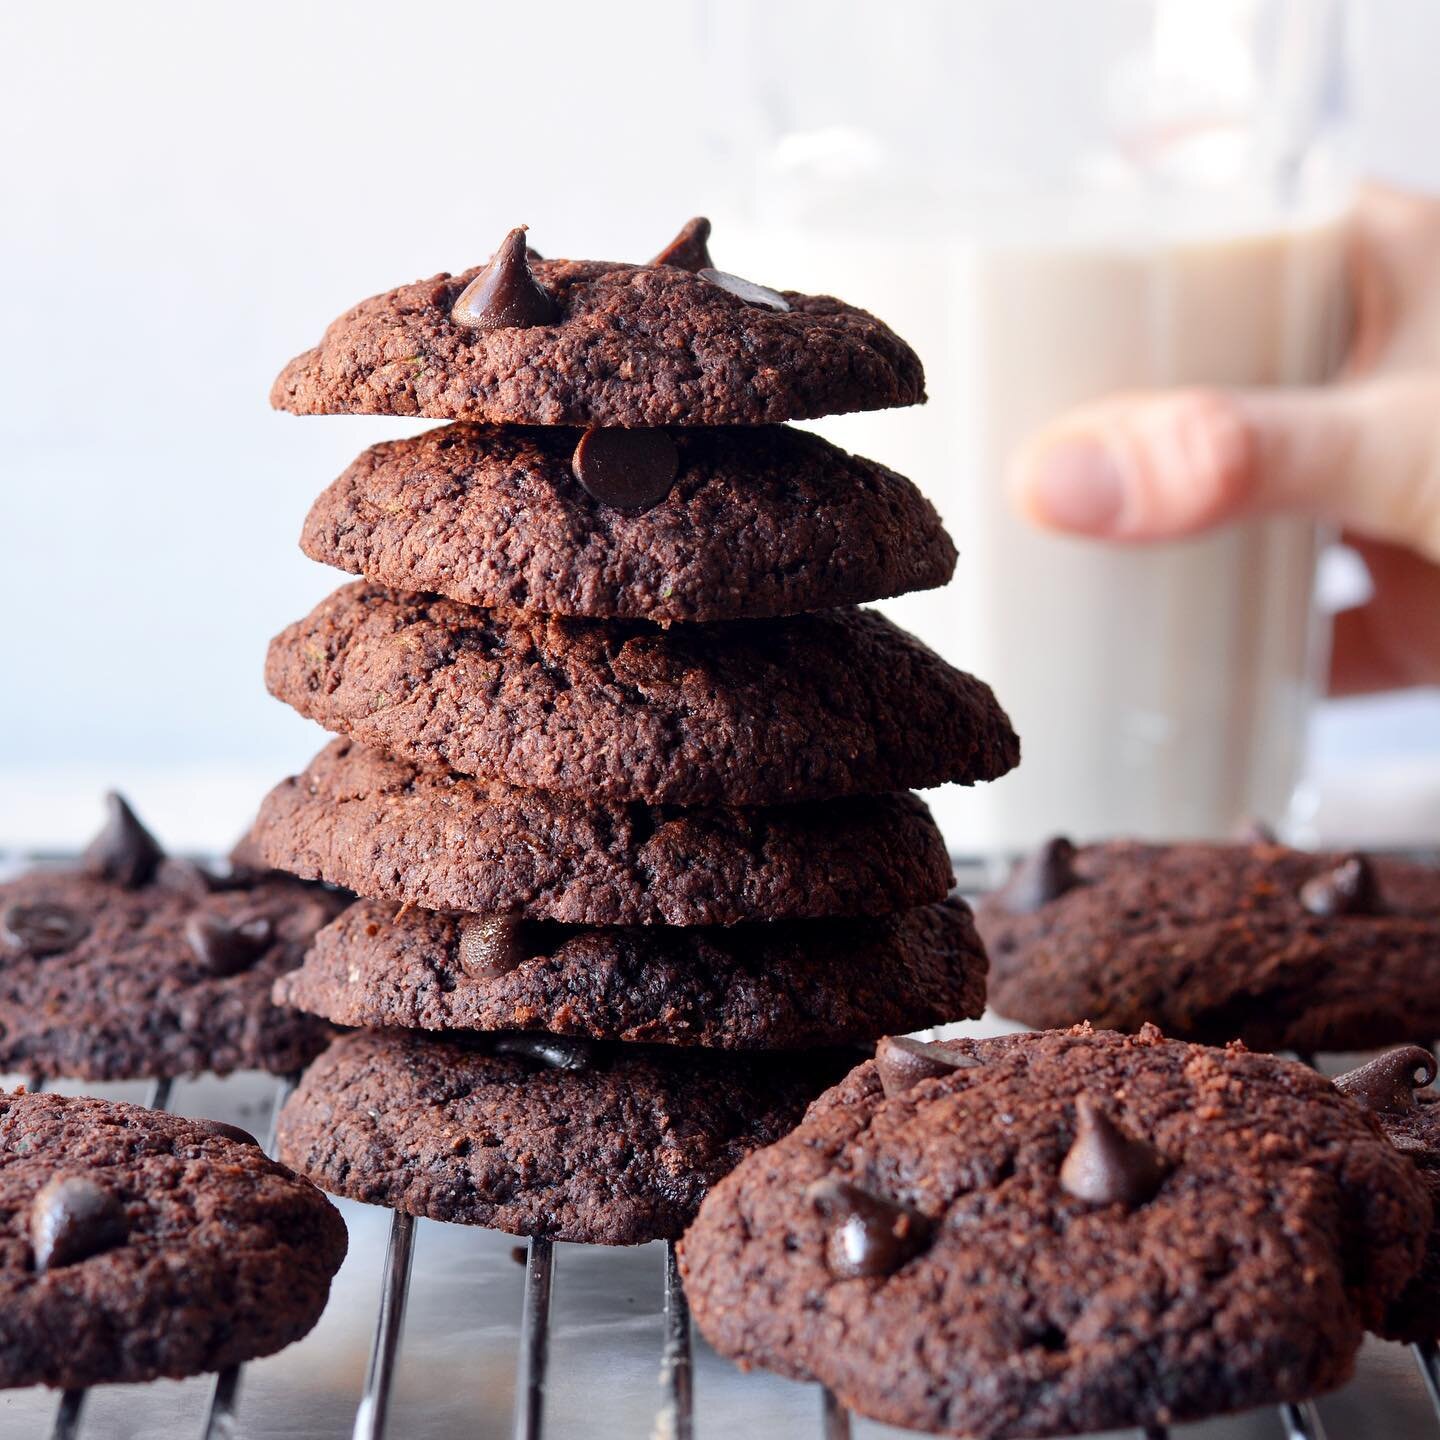 ✨Double Chocolate Zucchini Cookies✨

These cookies are so chocolatey, you&rsquo;d never guess they are secretly stuffed with zucchini (the secret ingredient that makes them extra soft and melt inside!).

🌱Reserve yours with next week&rsquo;s dinners